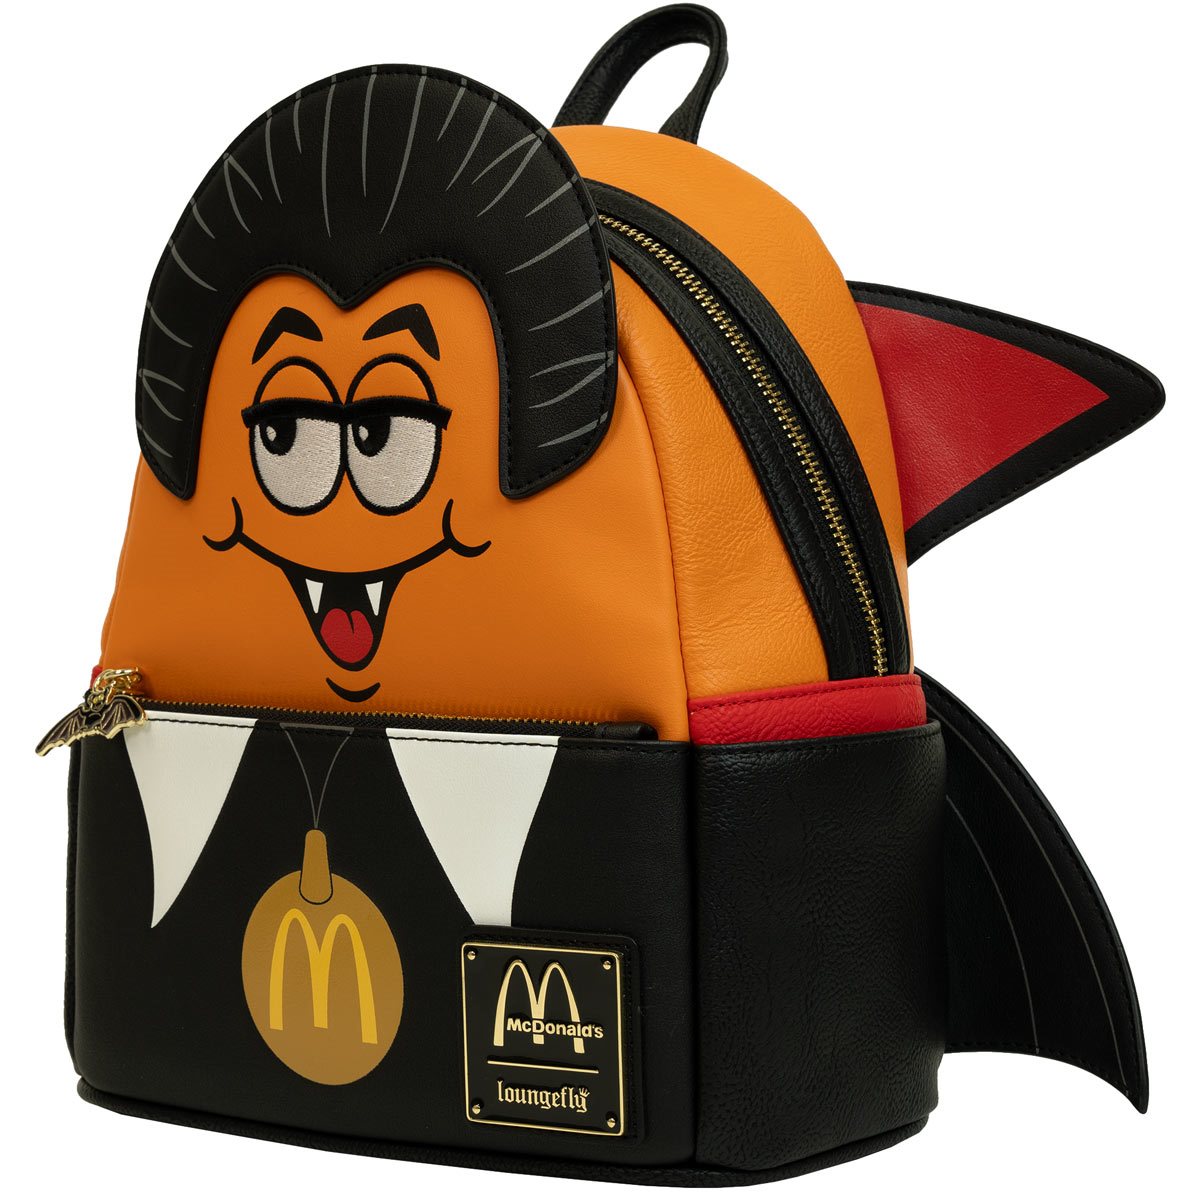 We Are Lovin' This Loungefly x McDonald's Collection